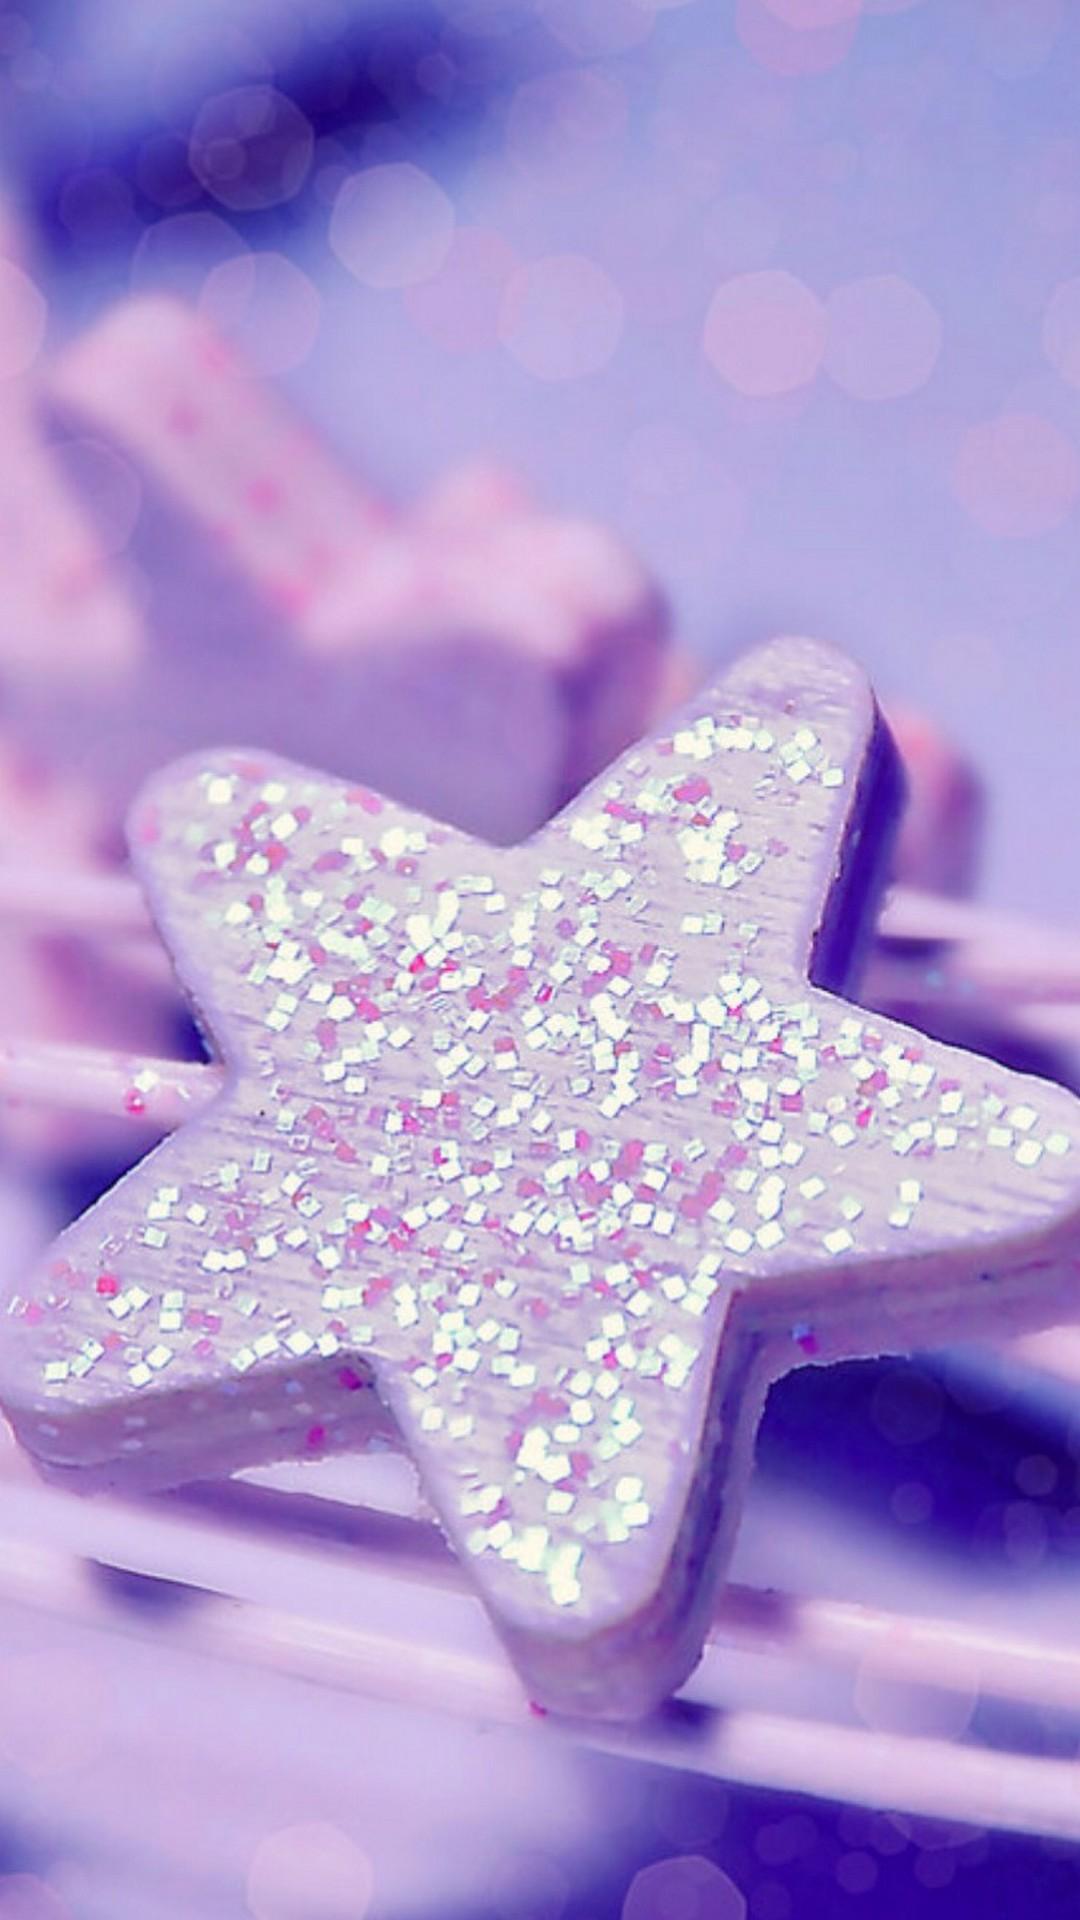 1080 x 1920 · jpeg - Cute Star Girly Wallpaper Android | 2021 Cute Wallpapers